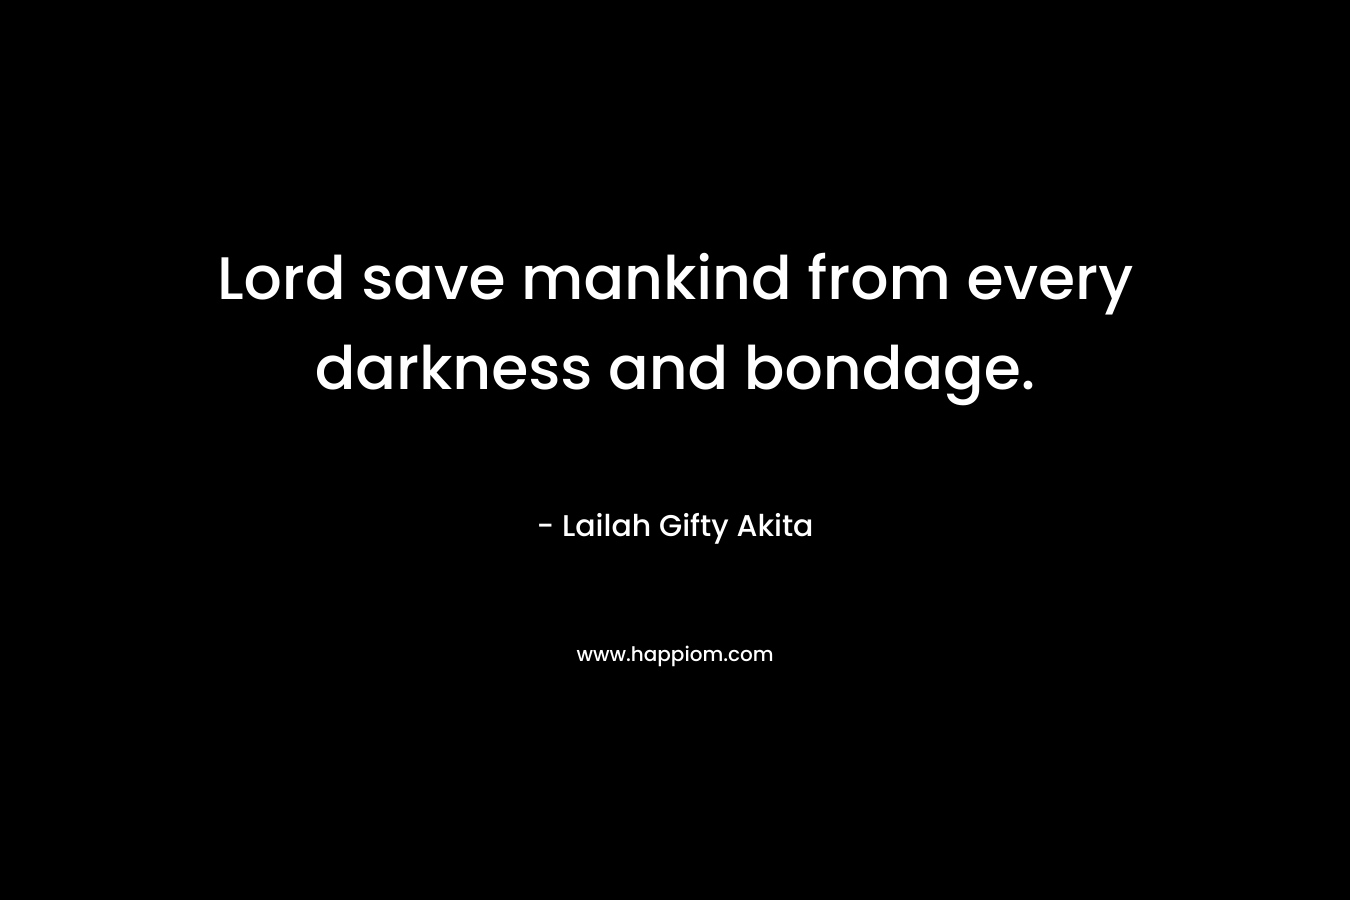 Lord save mankind from every darkness and bondage.